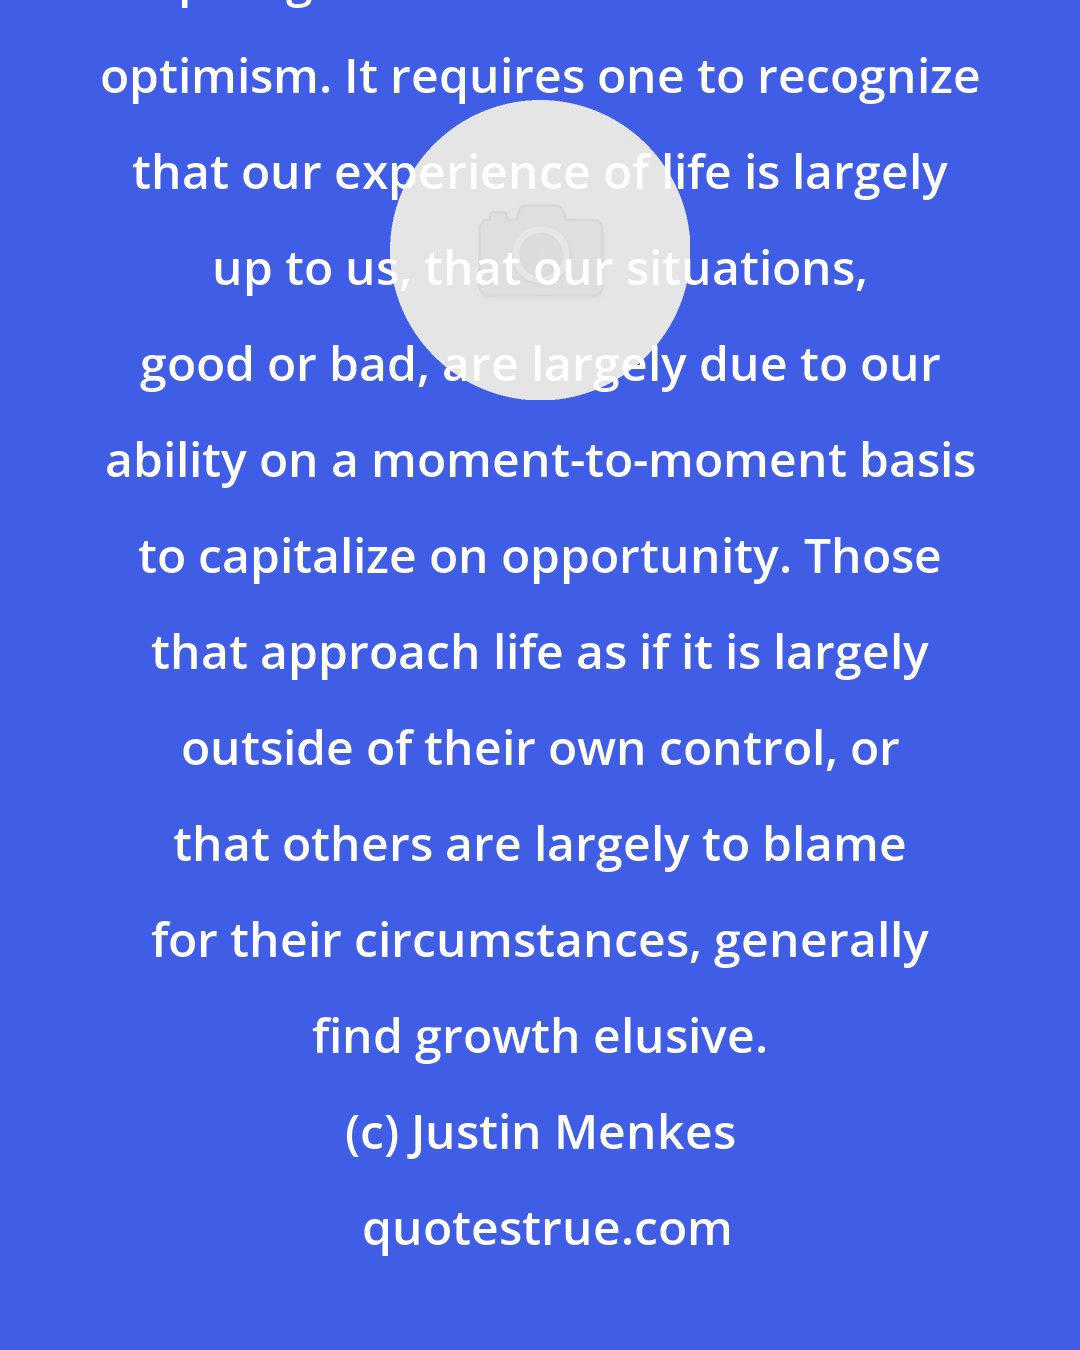 Justin Menkes: One of the capabilities, which seems to be the most difficult for aspiring leaders to maste is realistic optimism. It requires one to recognize that our experience of life is largely up to us, that our situations, good or bad, are largely due to our ability on a moment-to-moment basis to capitalize on opportunity. Those that approach life as if it is largely outside of their own control, or that others are largely to blame for their circumstances, generally find growth elusive.